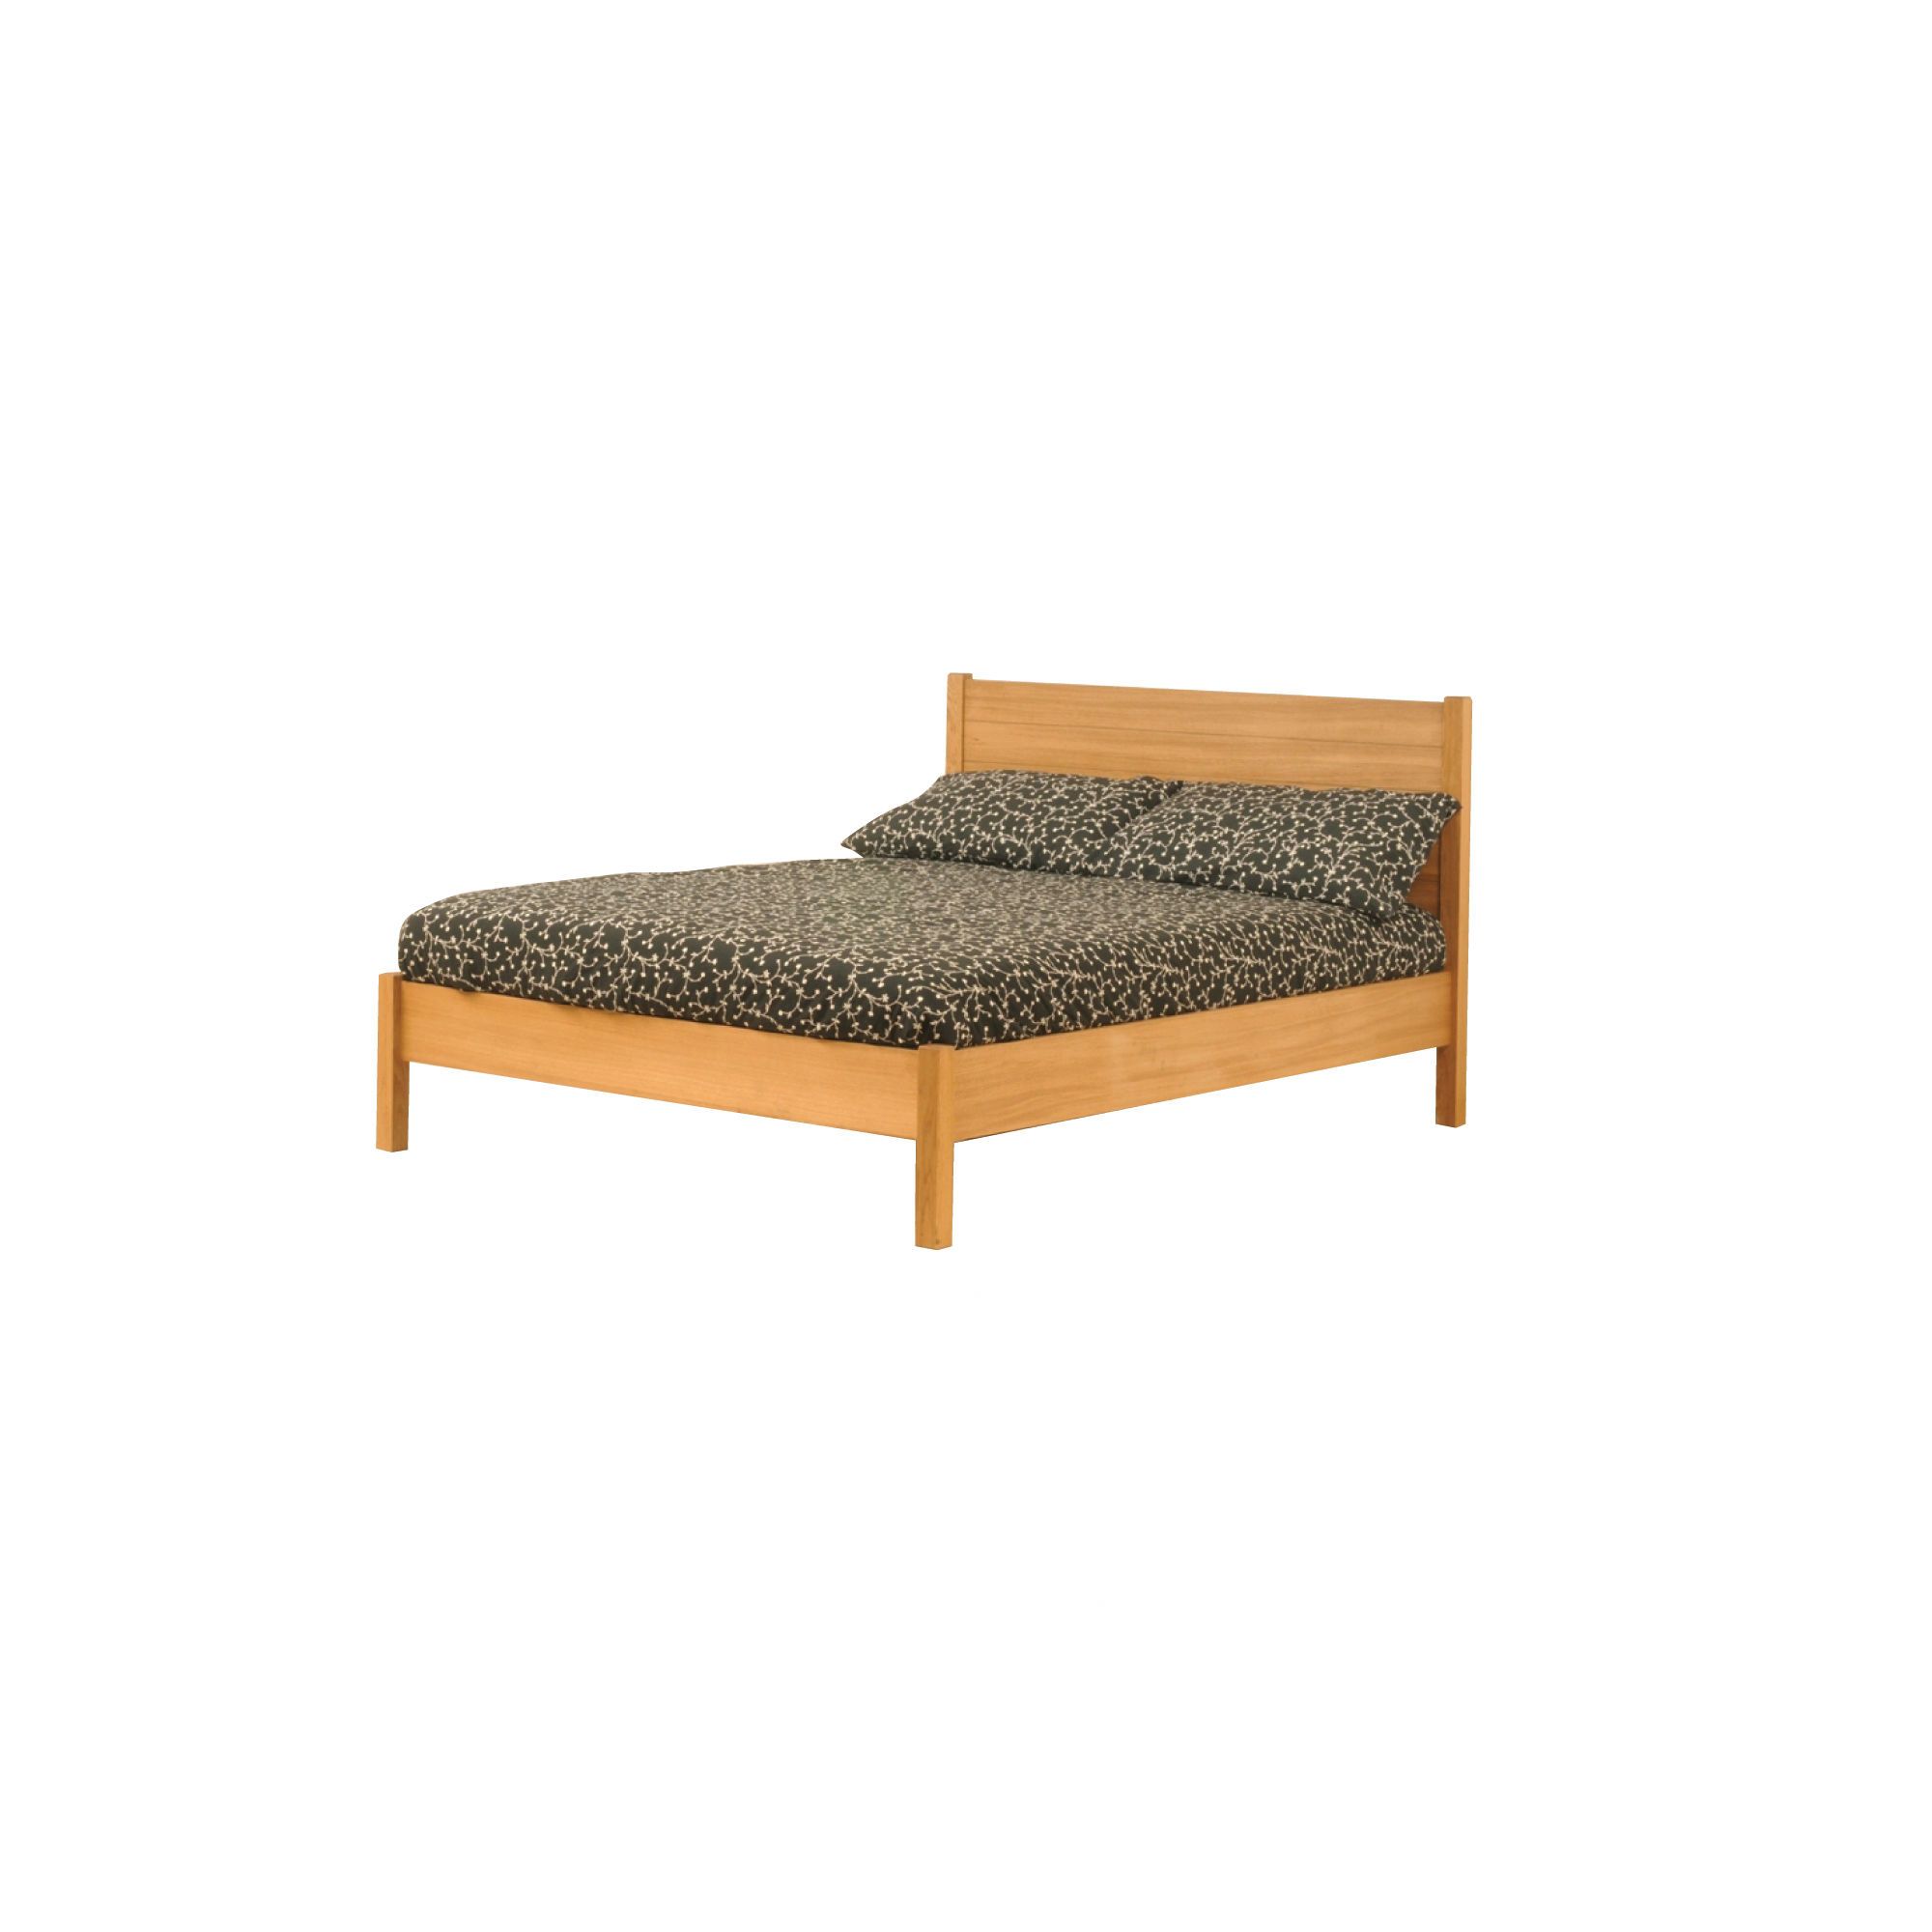 Home Zone Rebecca Bed Frame - Kingsize at Tescos Direct